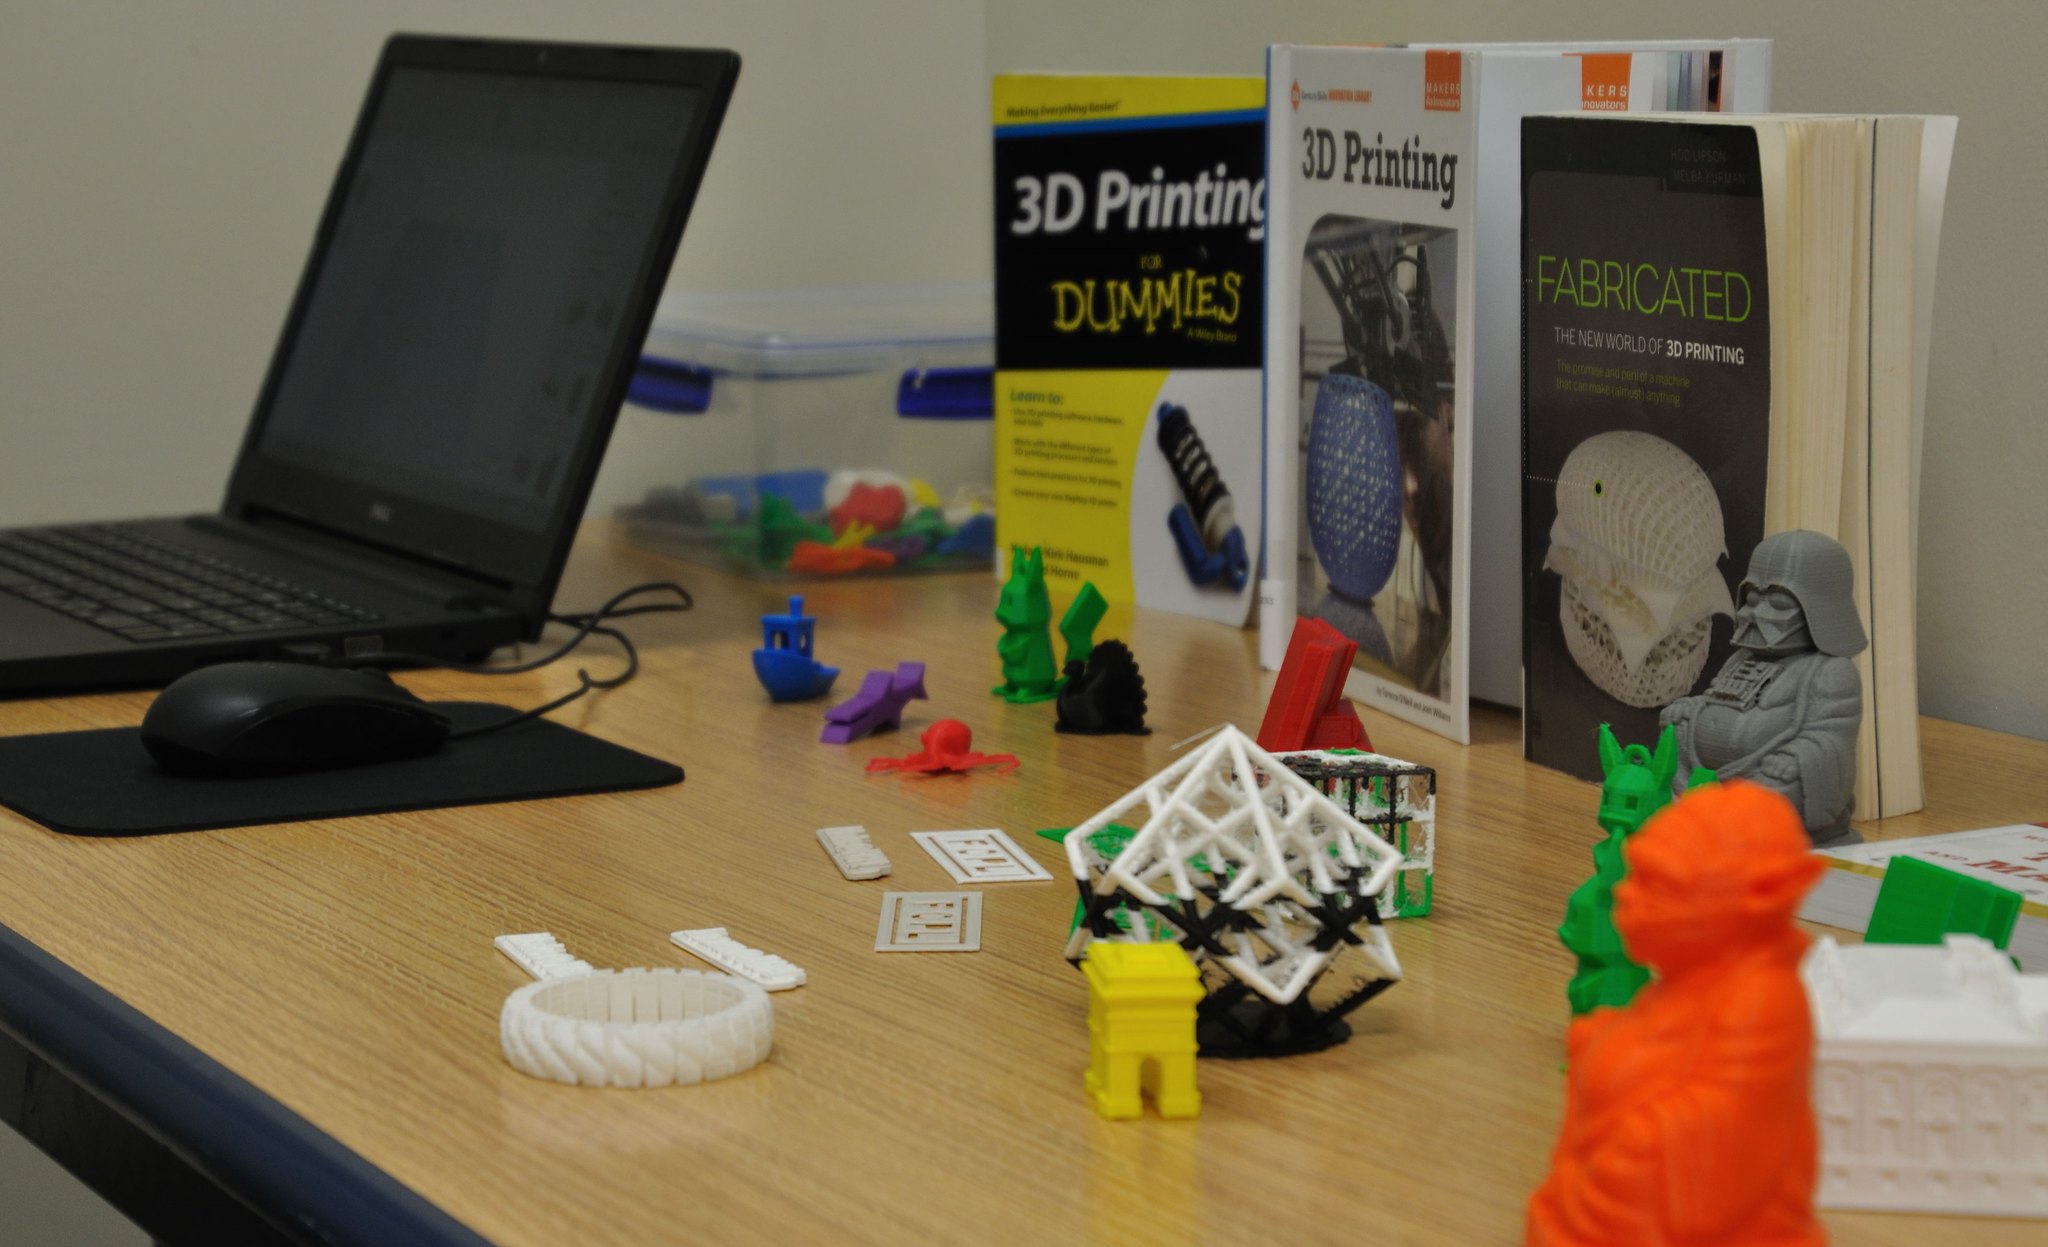 3D printing items at the library